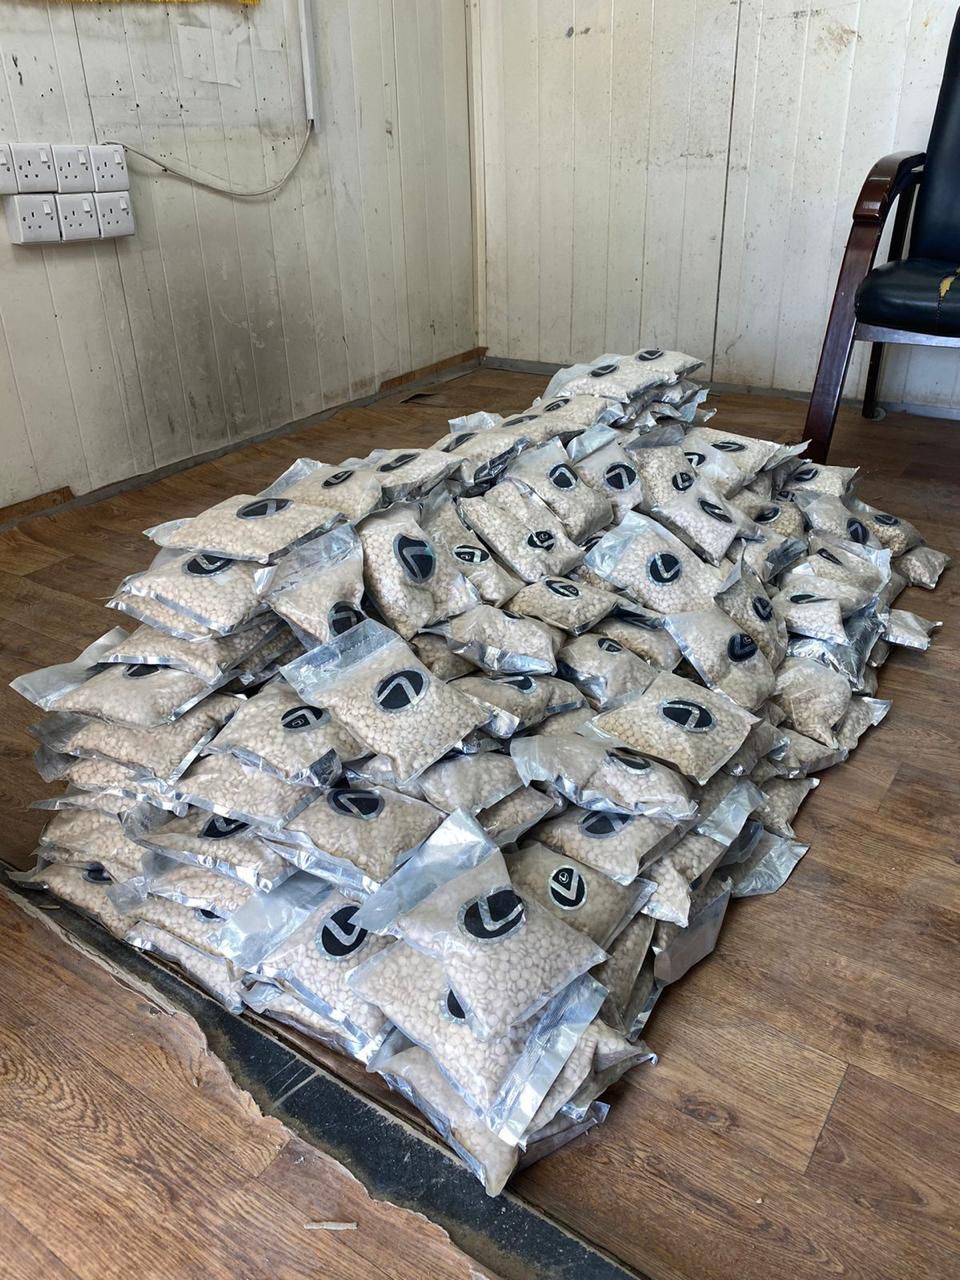 Iraqi intelligence agency thwarts an attempt to smuggle 100 kg of narcotics into the country